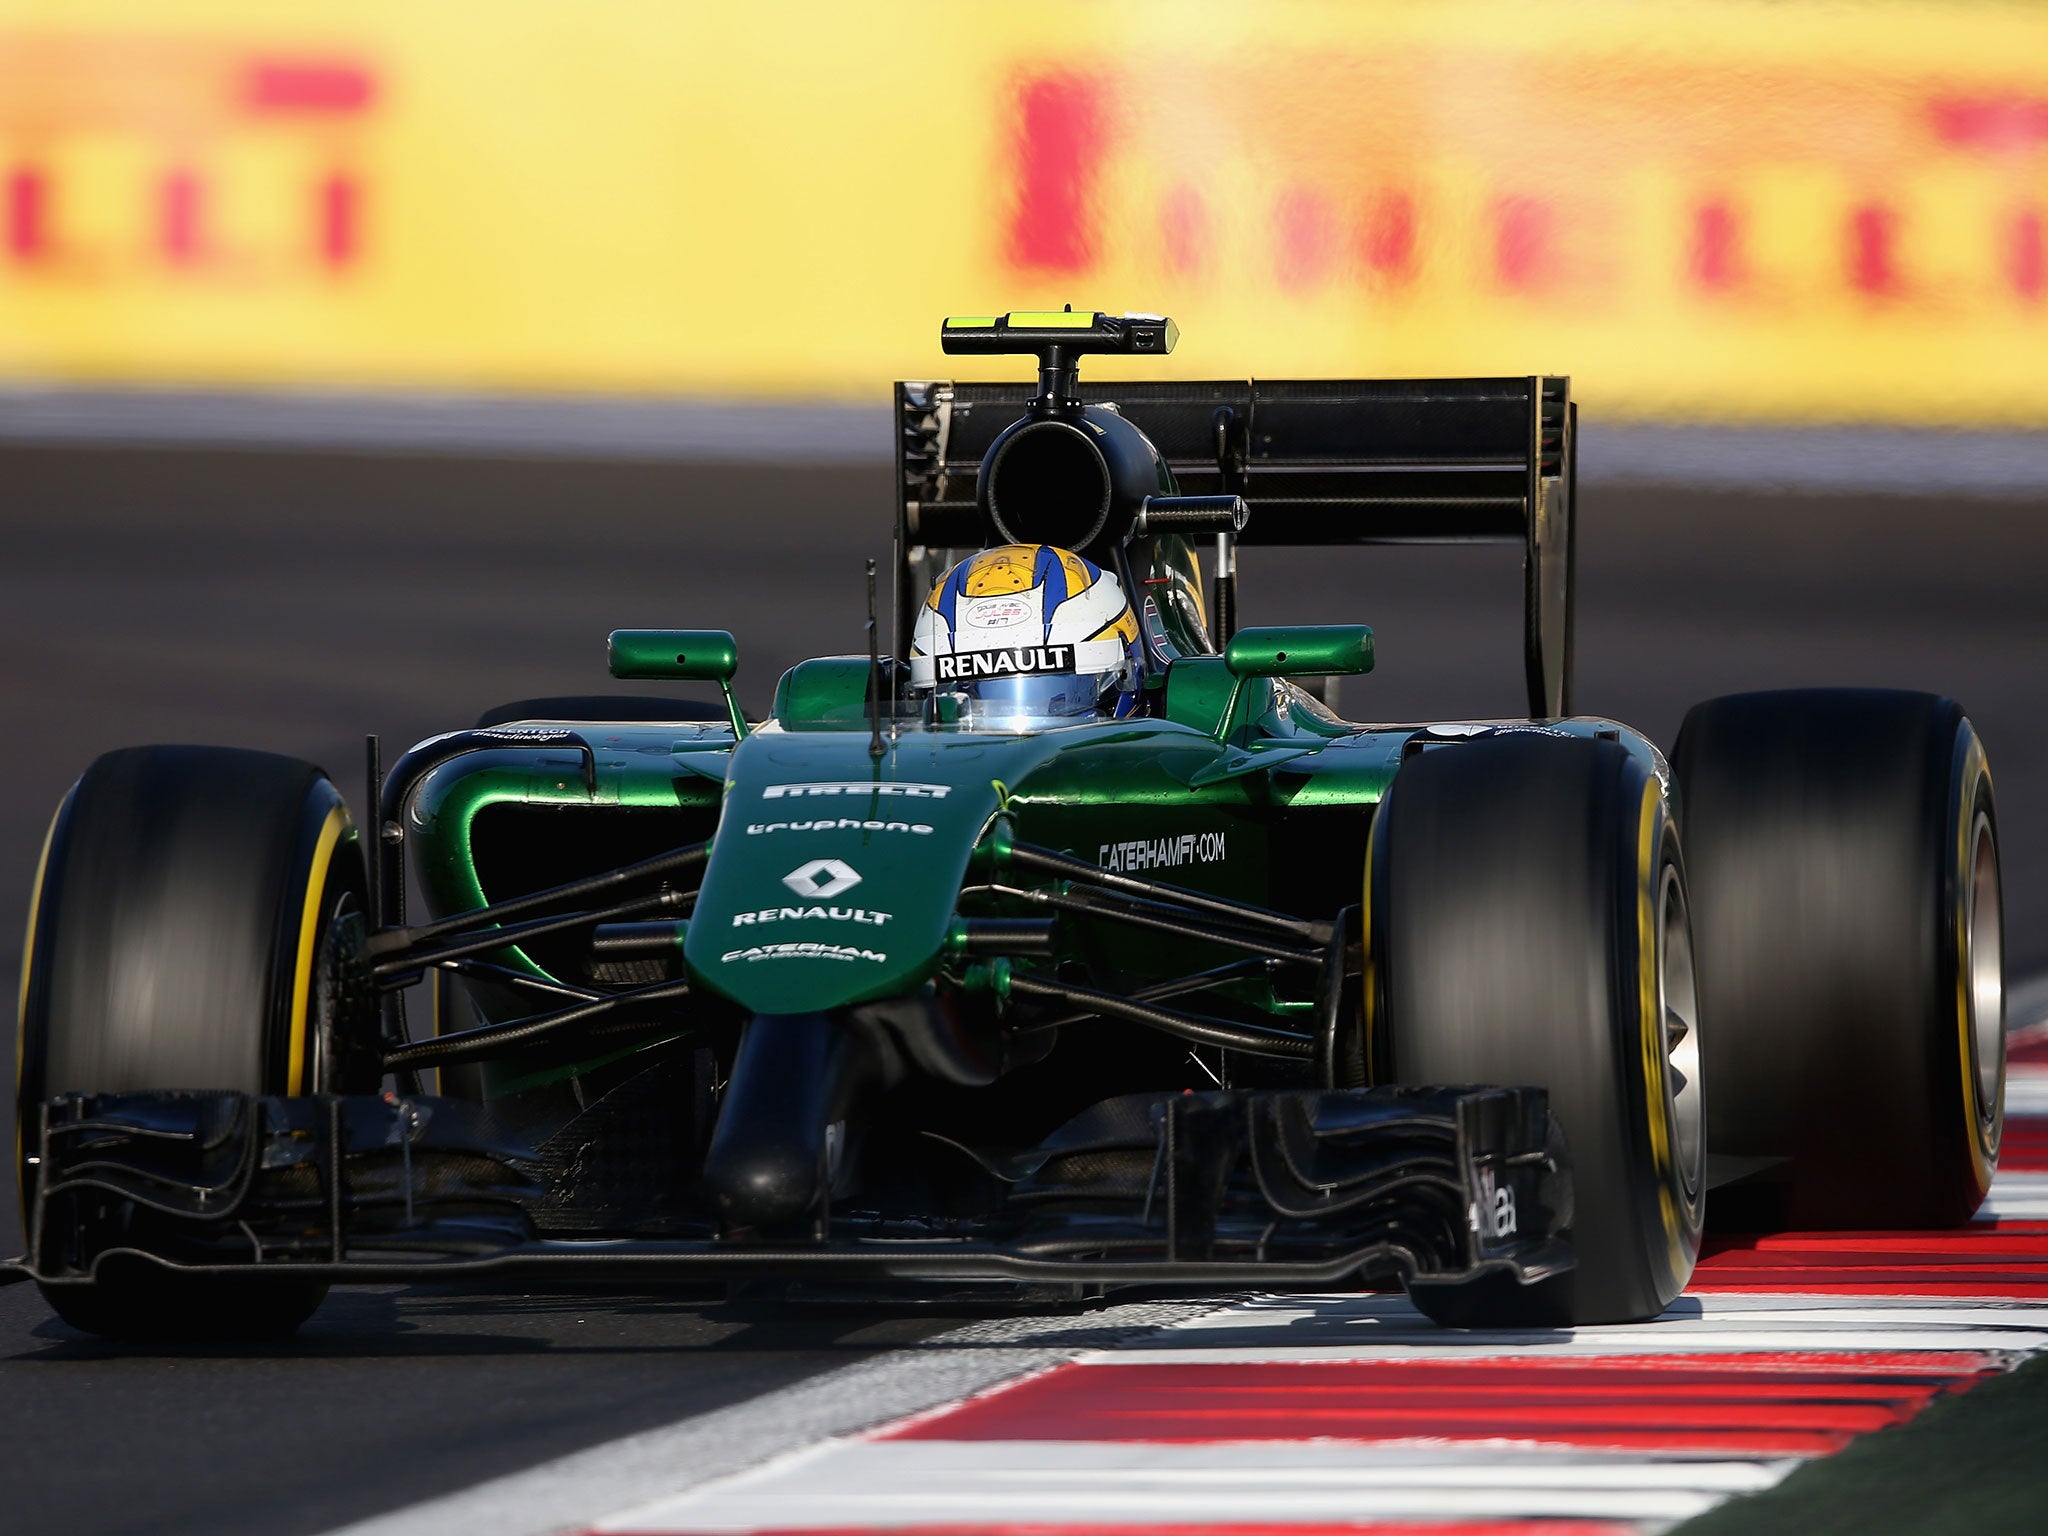 Marcus Ericsson driving for Caterham at the Russian Grand Prix earlier this year